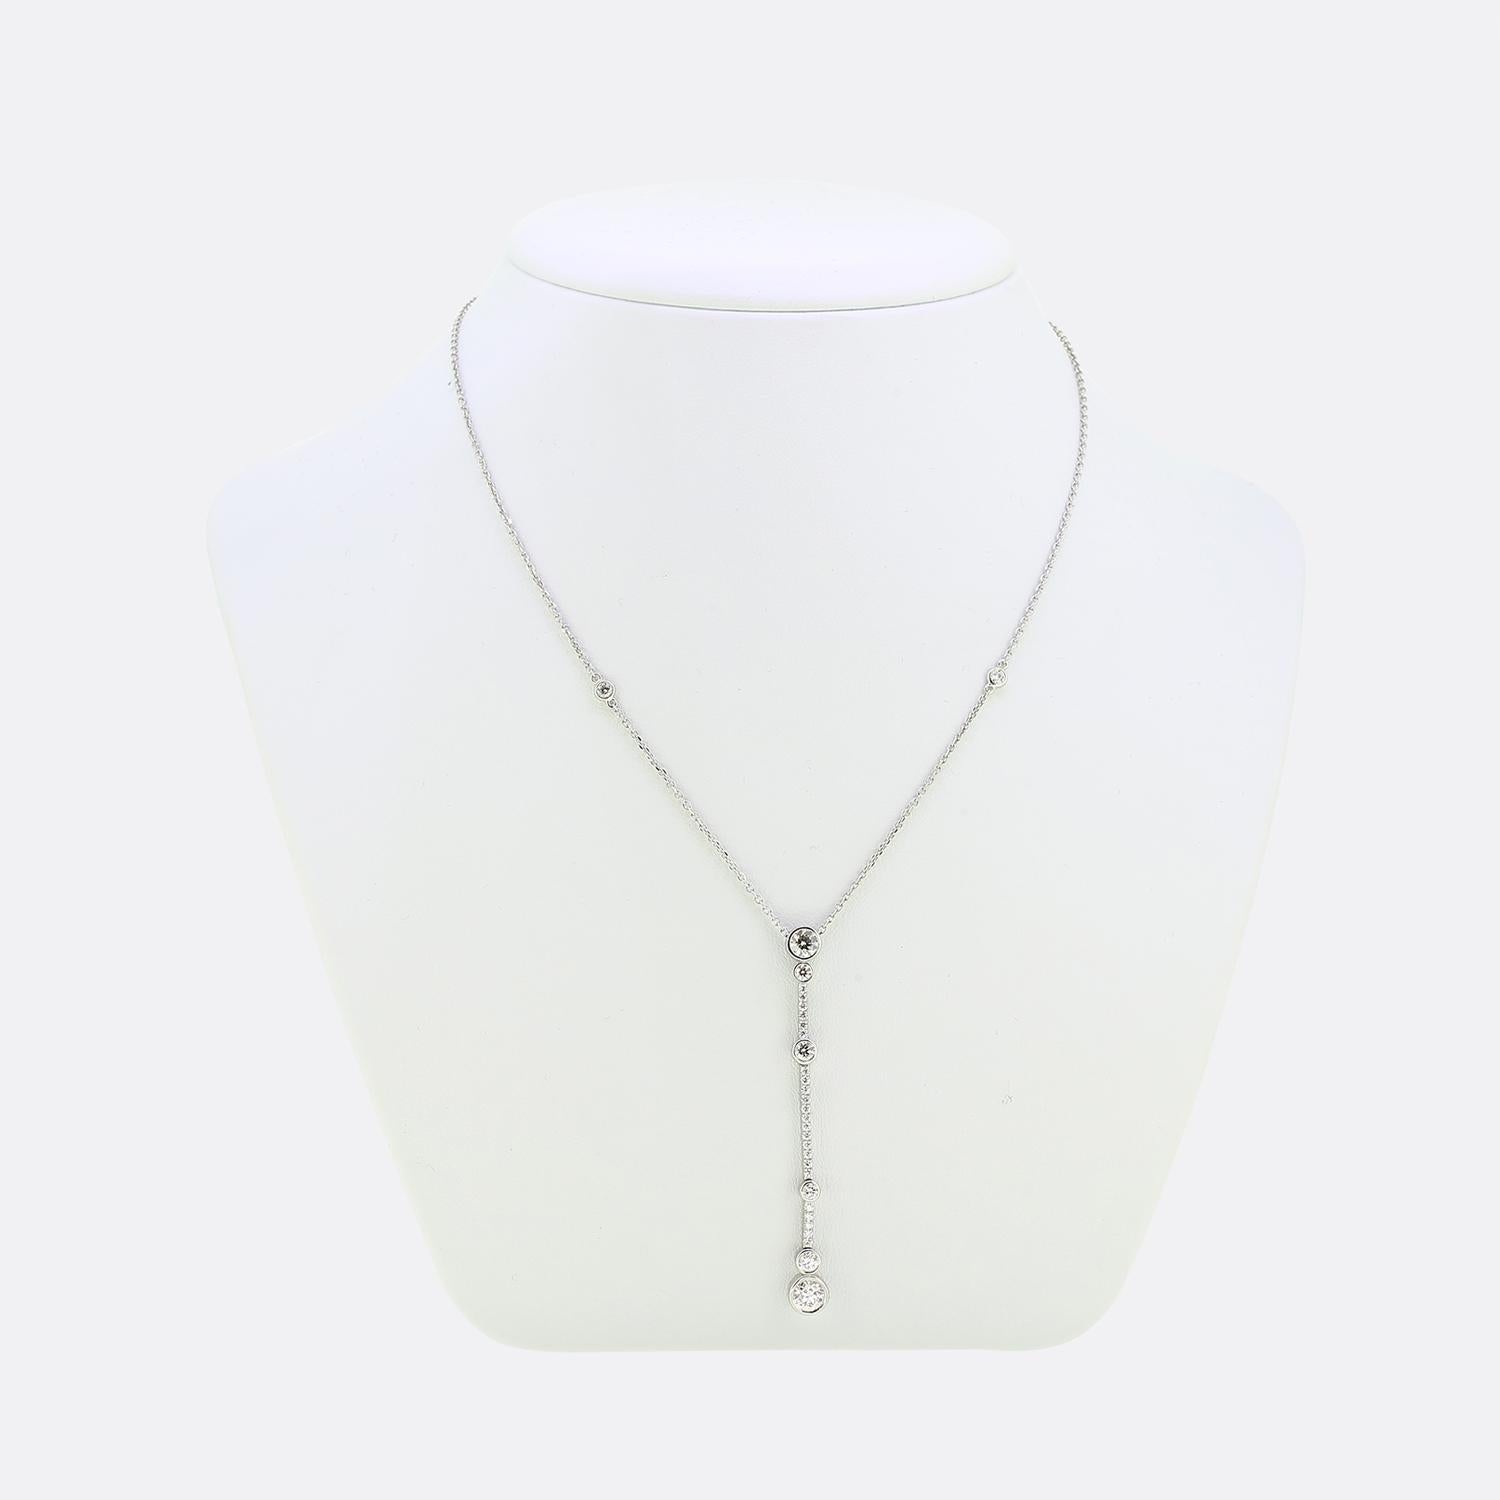 Here we have a stunning diamond necklace from the world renowned jewellery designer, Boodles. An elegant platinum belcher chain plays host to a scintillating drop pendant consisting of three round brilliant cut diamond set bars playing host to six